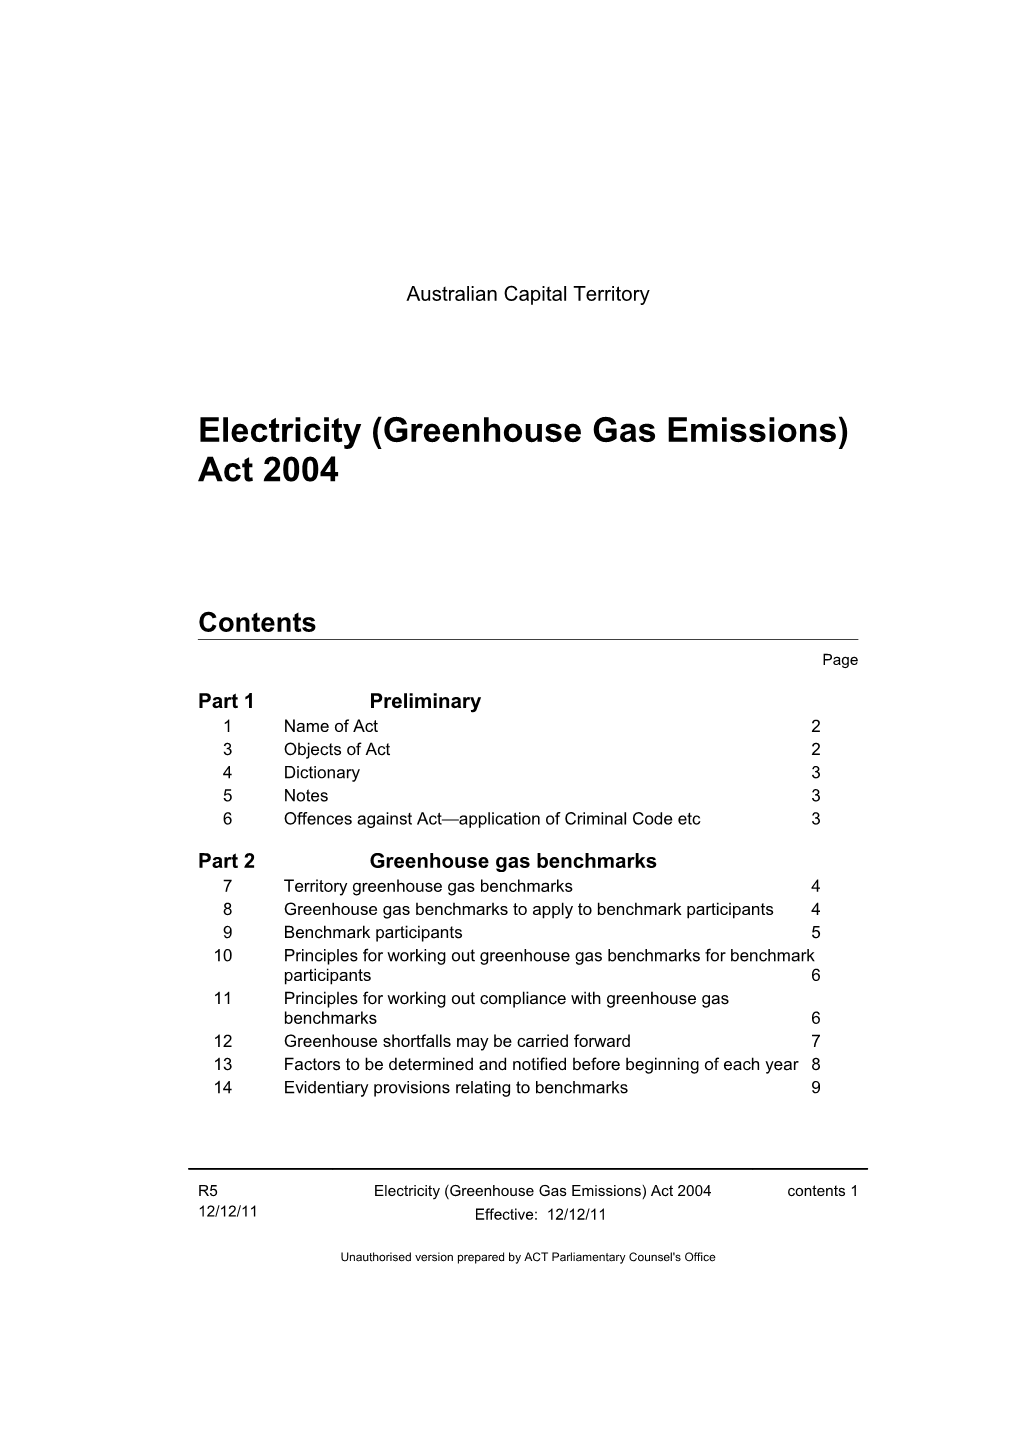 Electricity (Greenhouse Gas Emissions) Act 2004